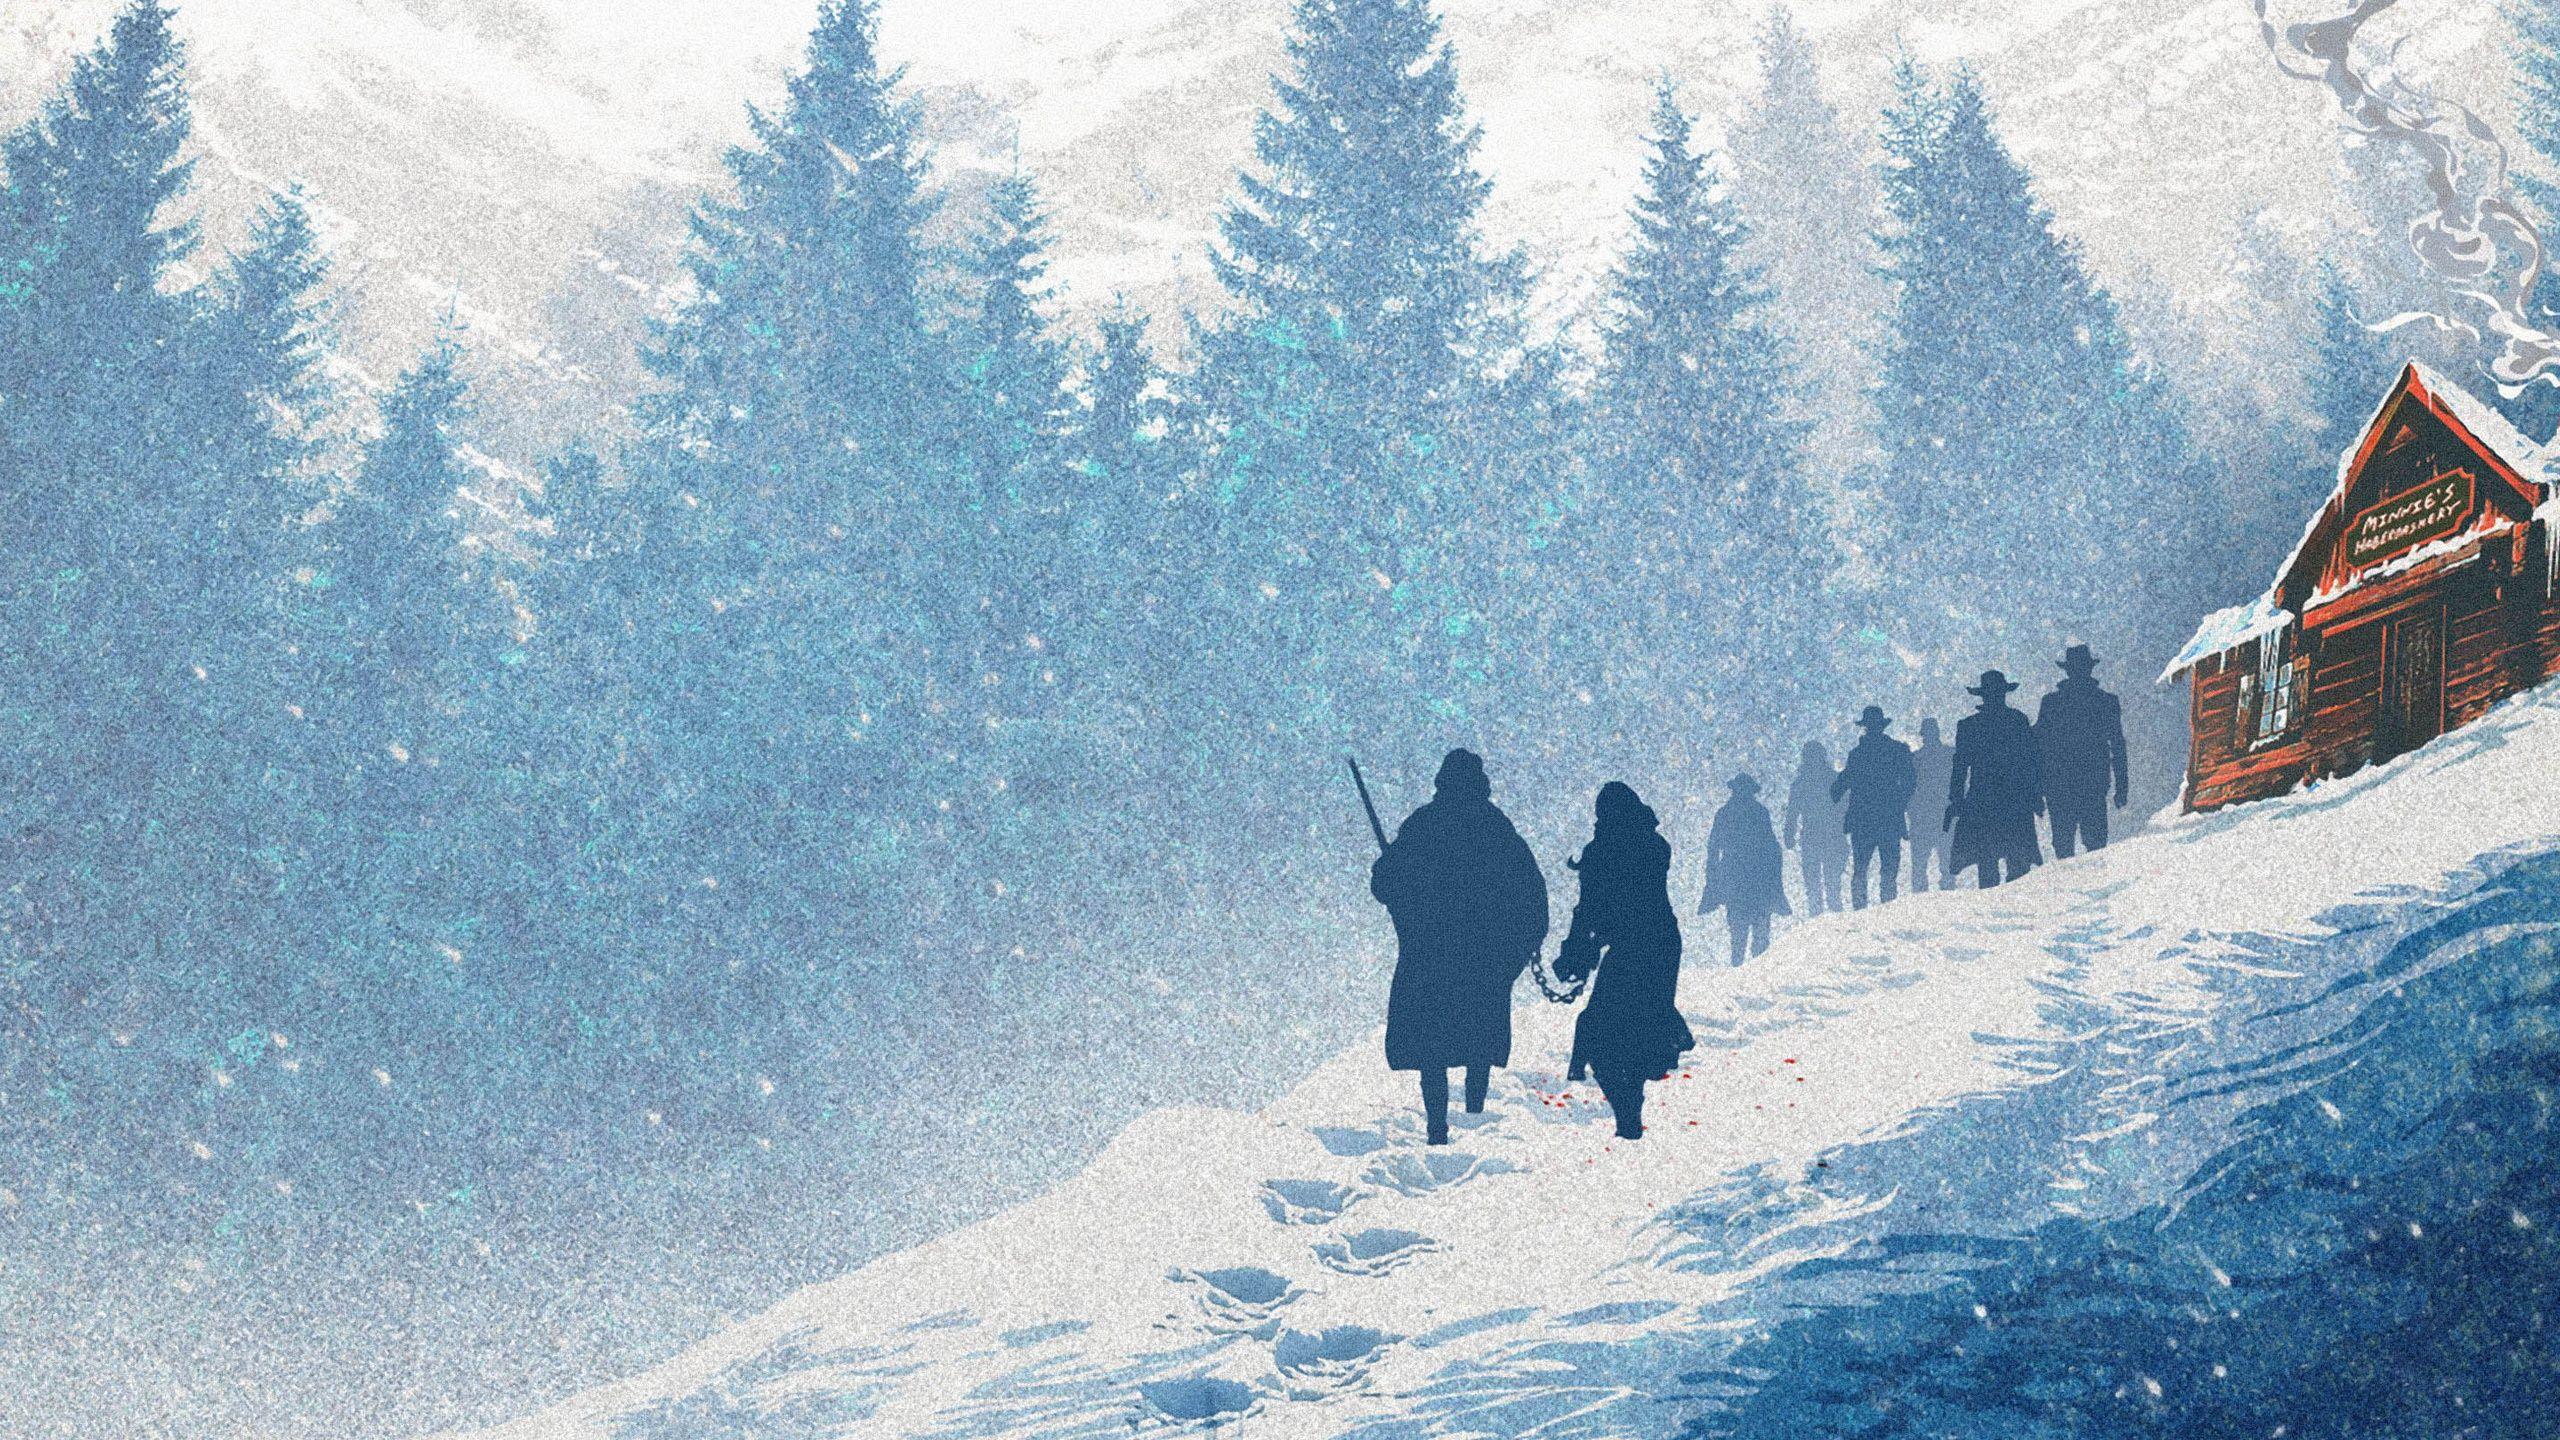 The Hateful Eight Wallpaper in jpg format for free download